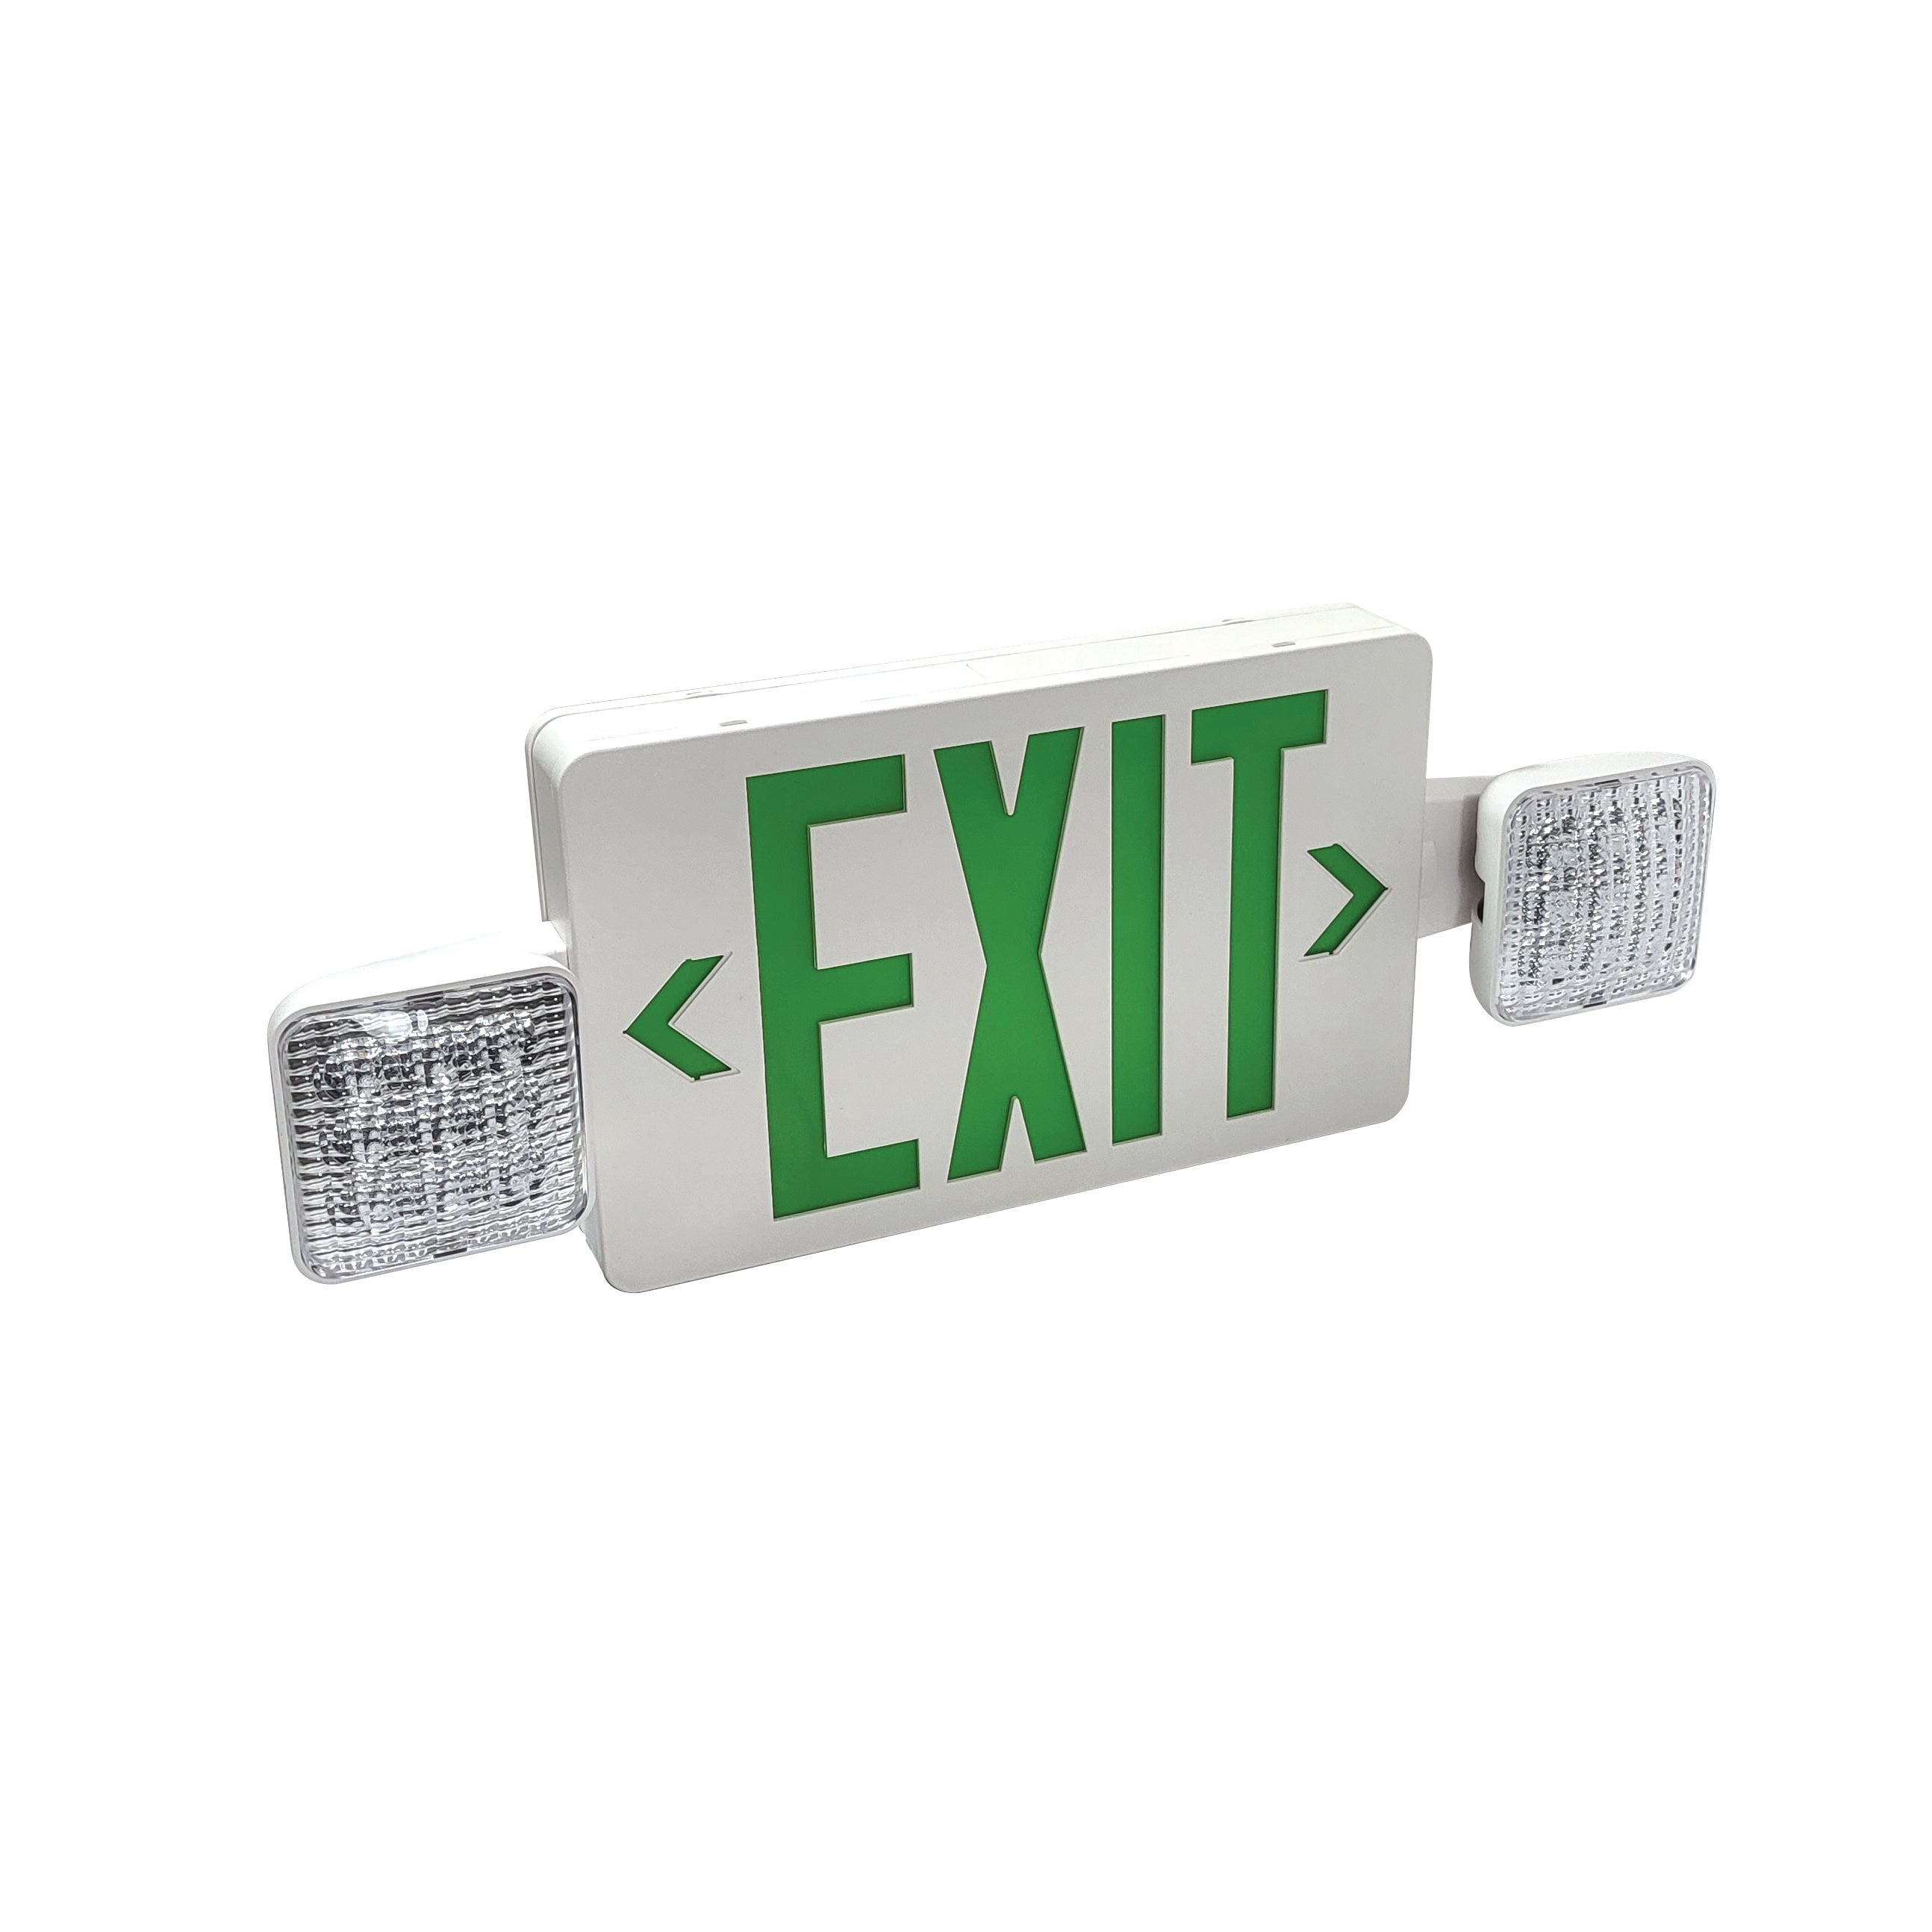 Nora Lighting NEX-712-LED/G - Exit / Emergency - LED Exit and Emergency Combination with Adjustable Heads, Battery Backup, Green Letters / White Housing